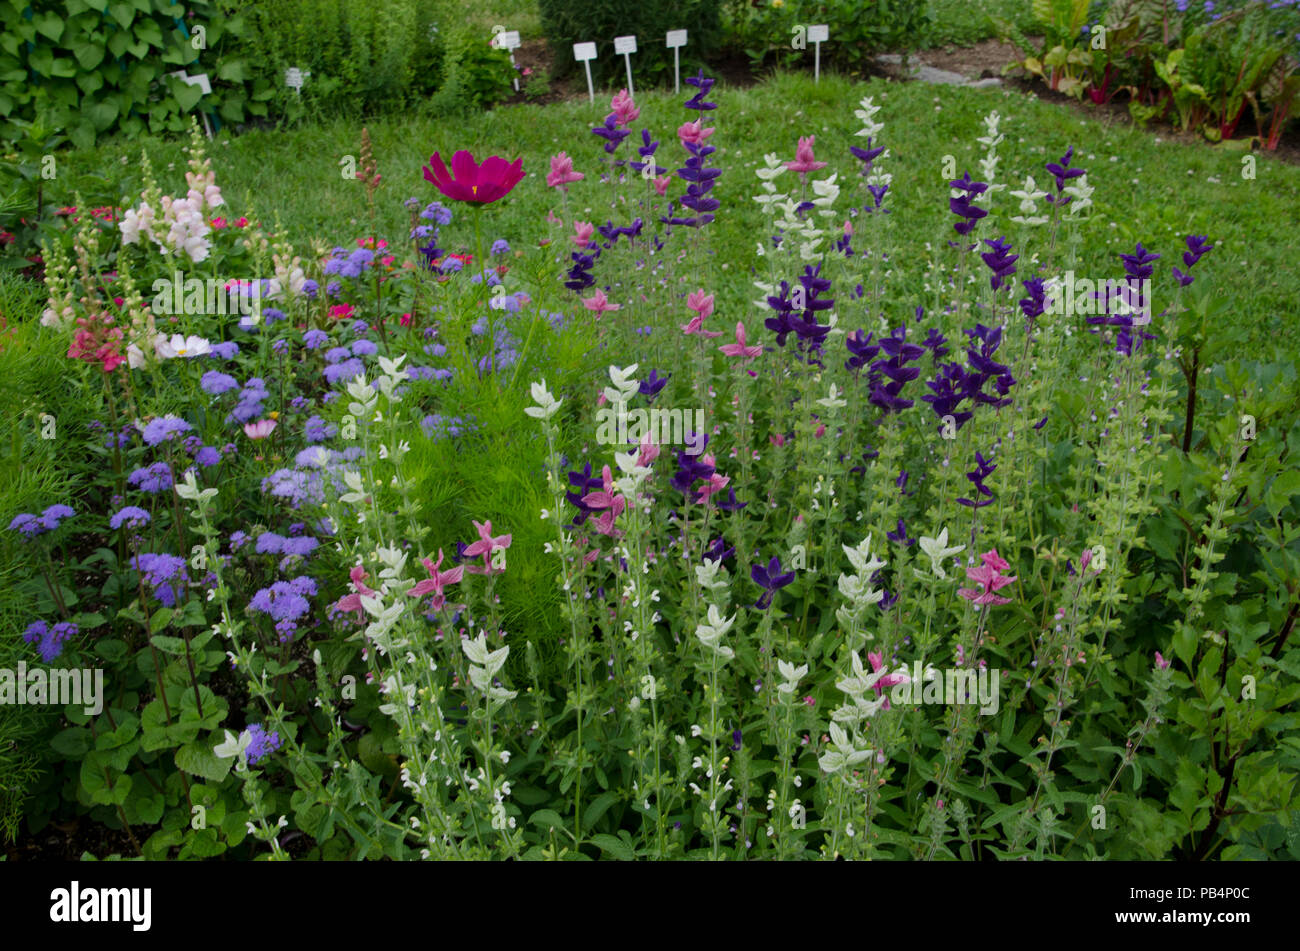 Blooming colourful flowers in a community garden in summer, Maine USA Stock Photo